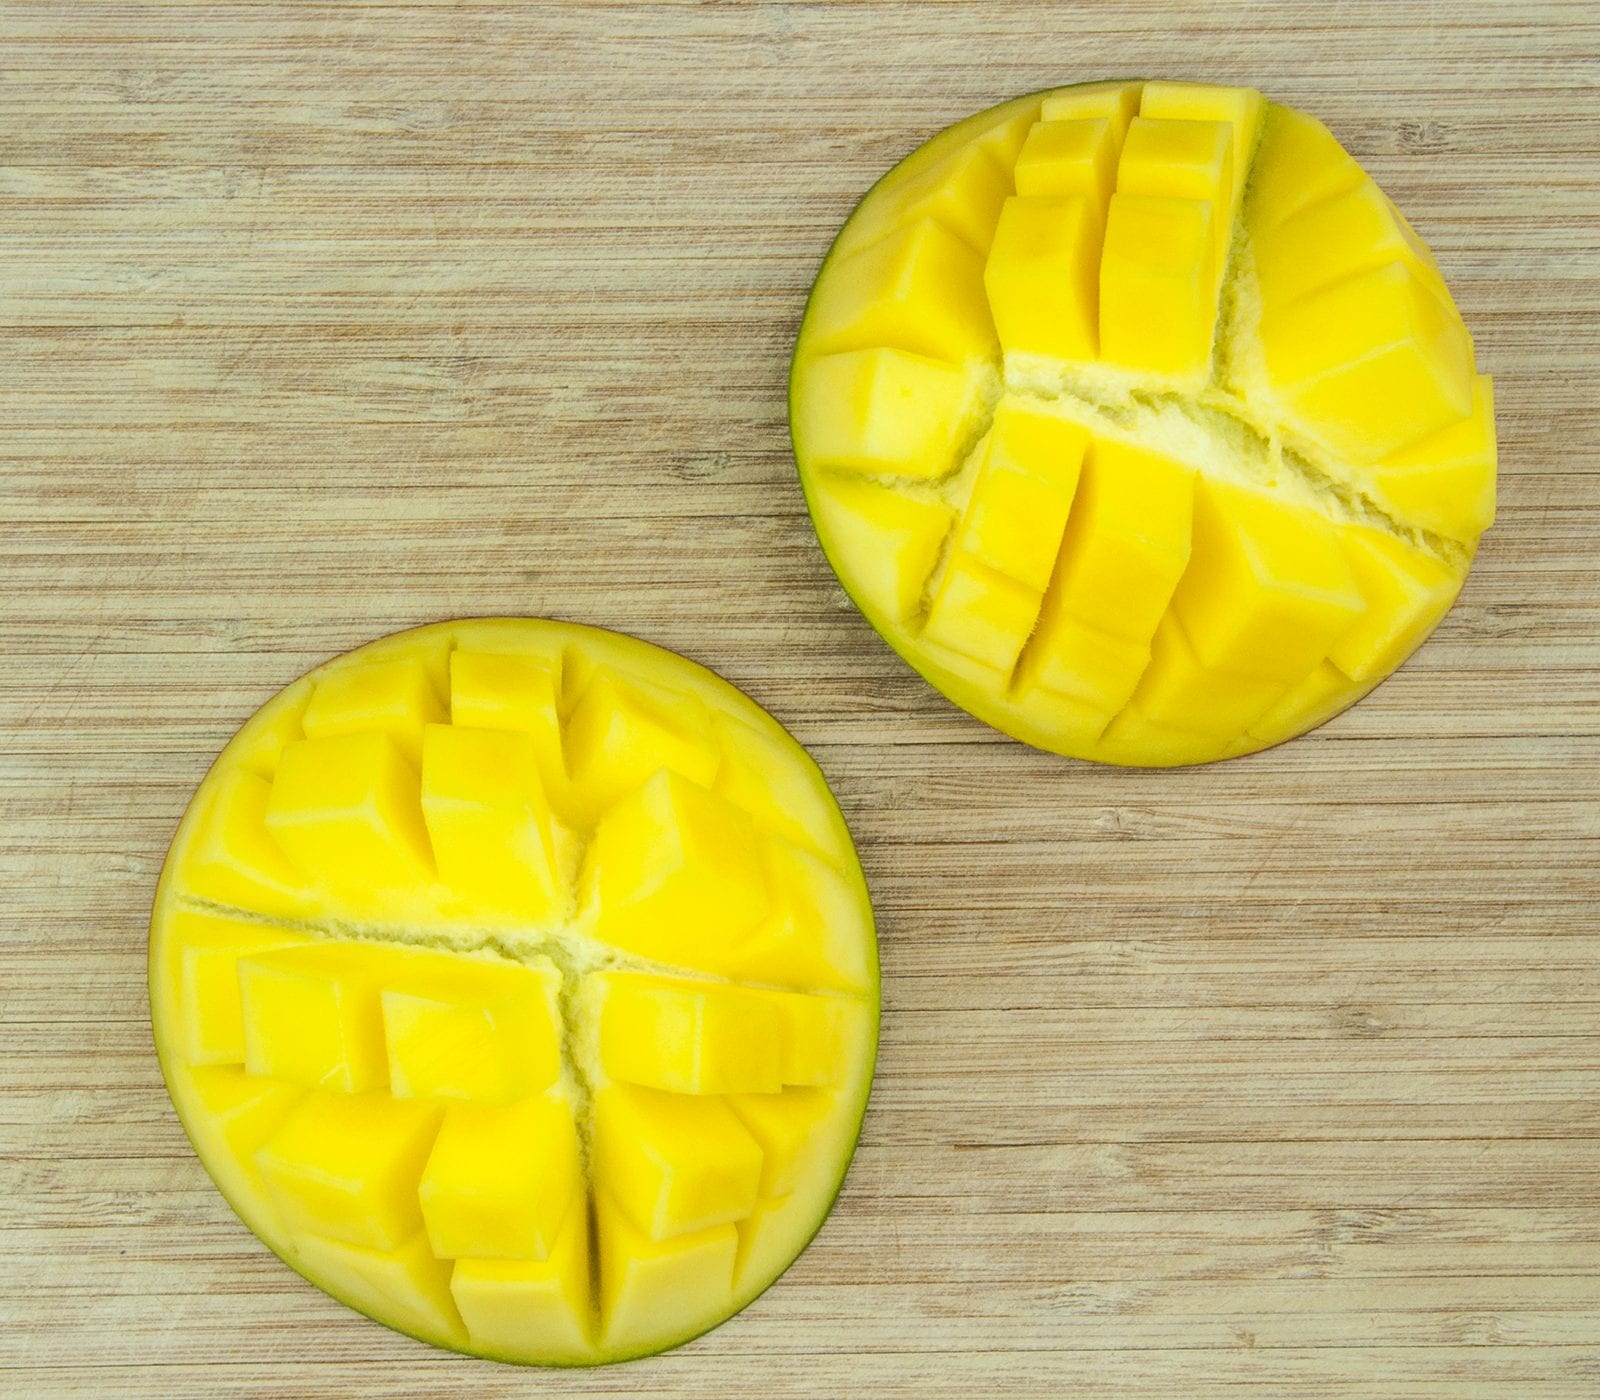 Ever wondered how to prepare a mango like in those wonderful tropical fruit displays you see at fancy buffets? It's easy. Just follow this simple tutorial... | theyumyumclub.com